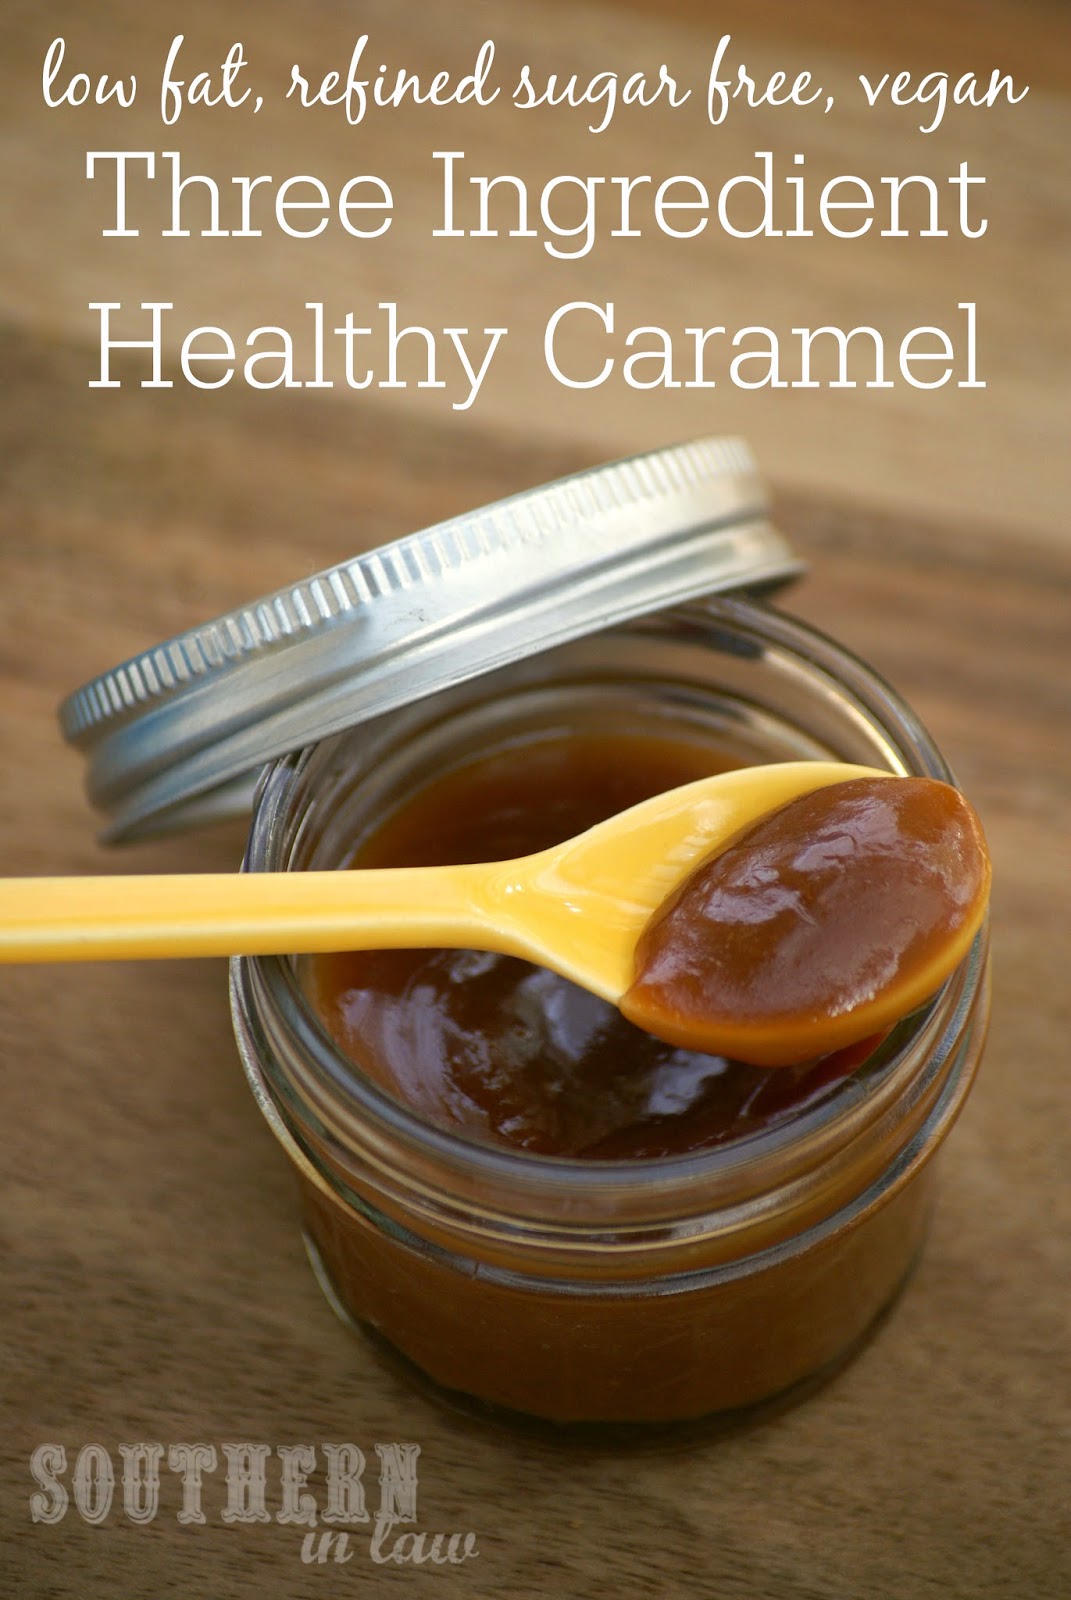 Healthy Three Ingredient Peanut Caramel Sauce - Low fat, gluten free, clean eating friendly, refined sugar free, vegan, dairy free and guilt free!